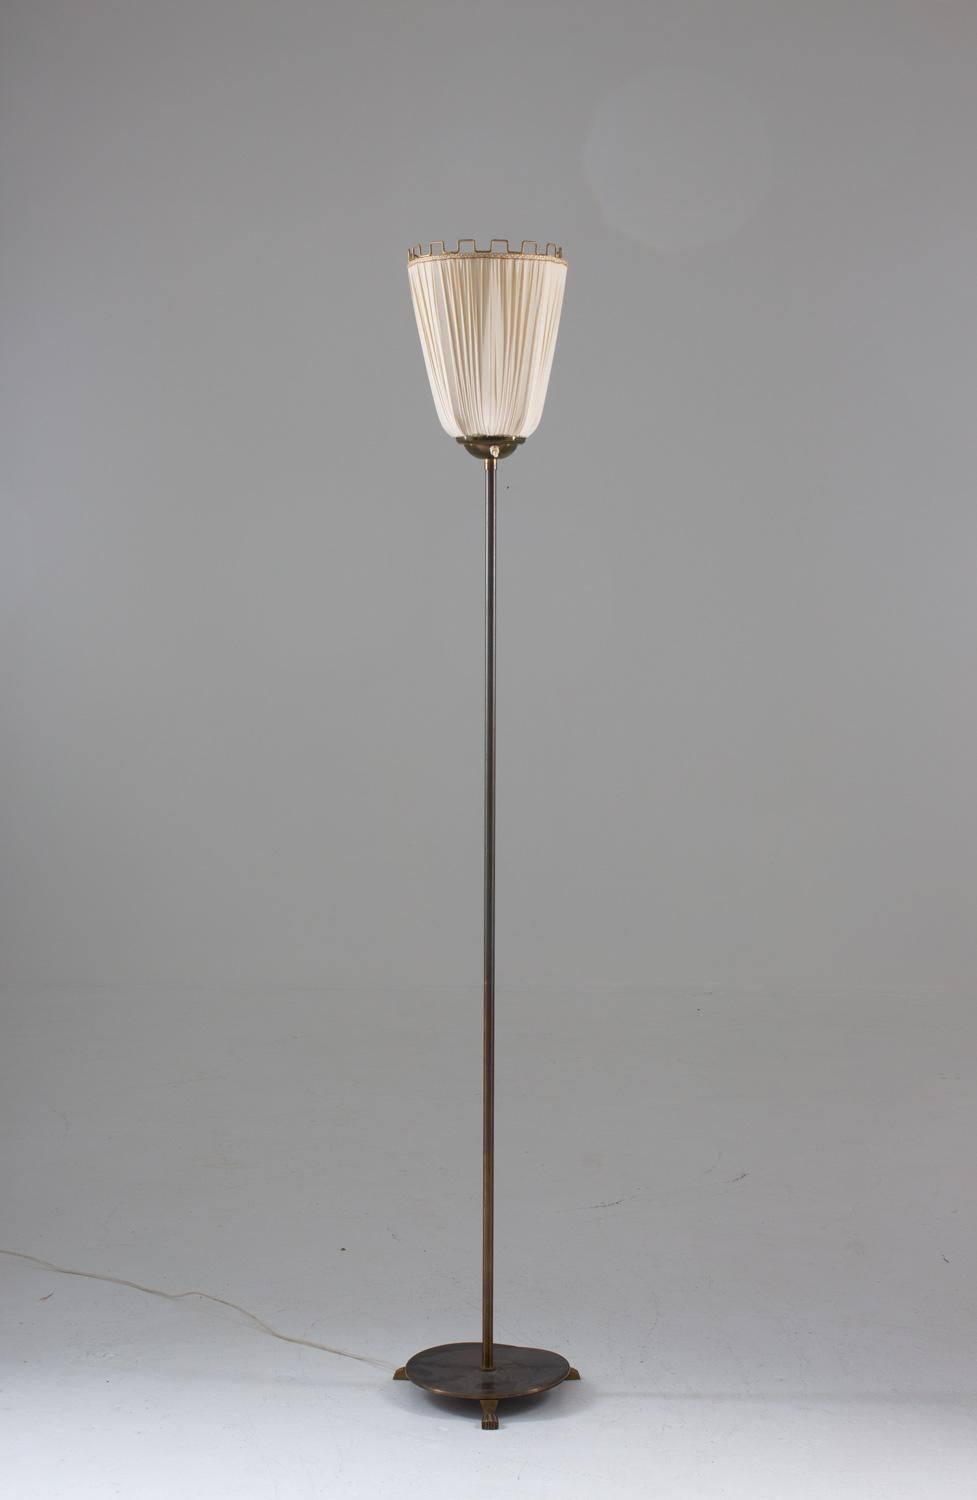 Rare floor lamp, most likely manufactured in Sweden, 1930s.

This floor lamp consists of a brass pole, supporting an up light fabric shade with brass ornaments.

Condition: Very good original condition. Original shade with light wear.